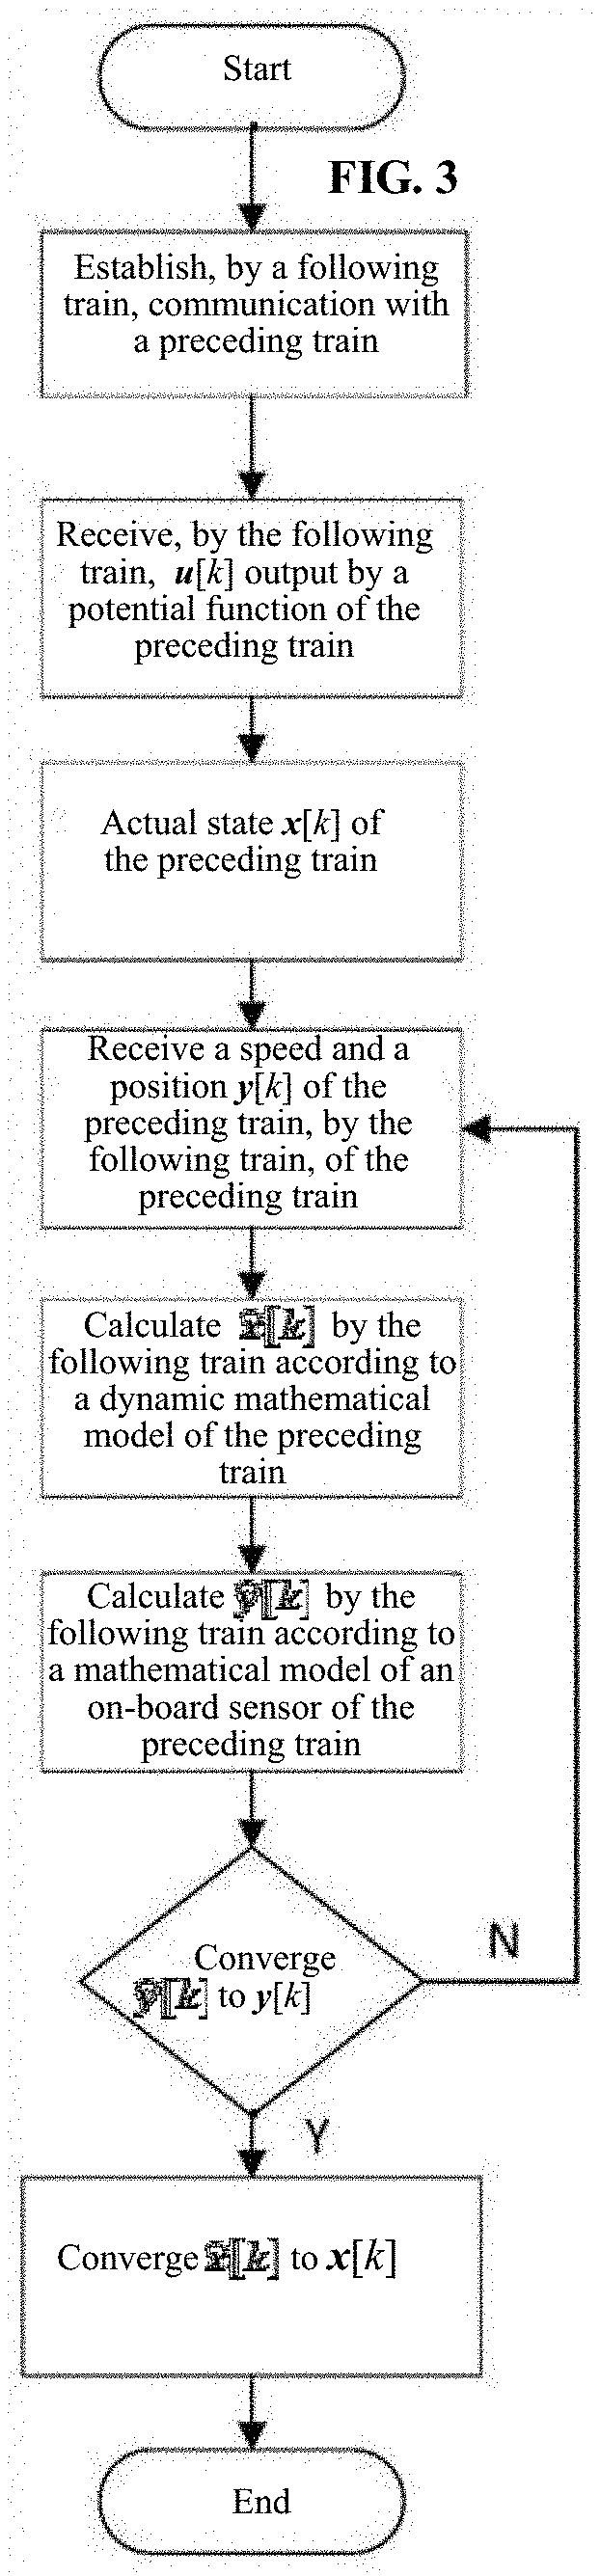 Method and device for cooperative control of multiple trains